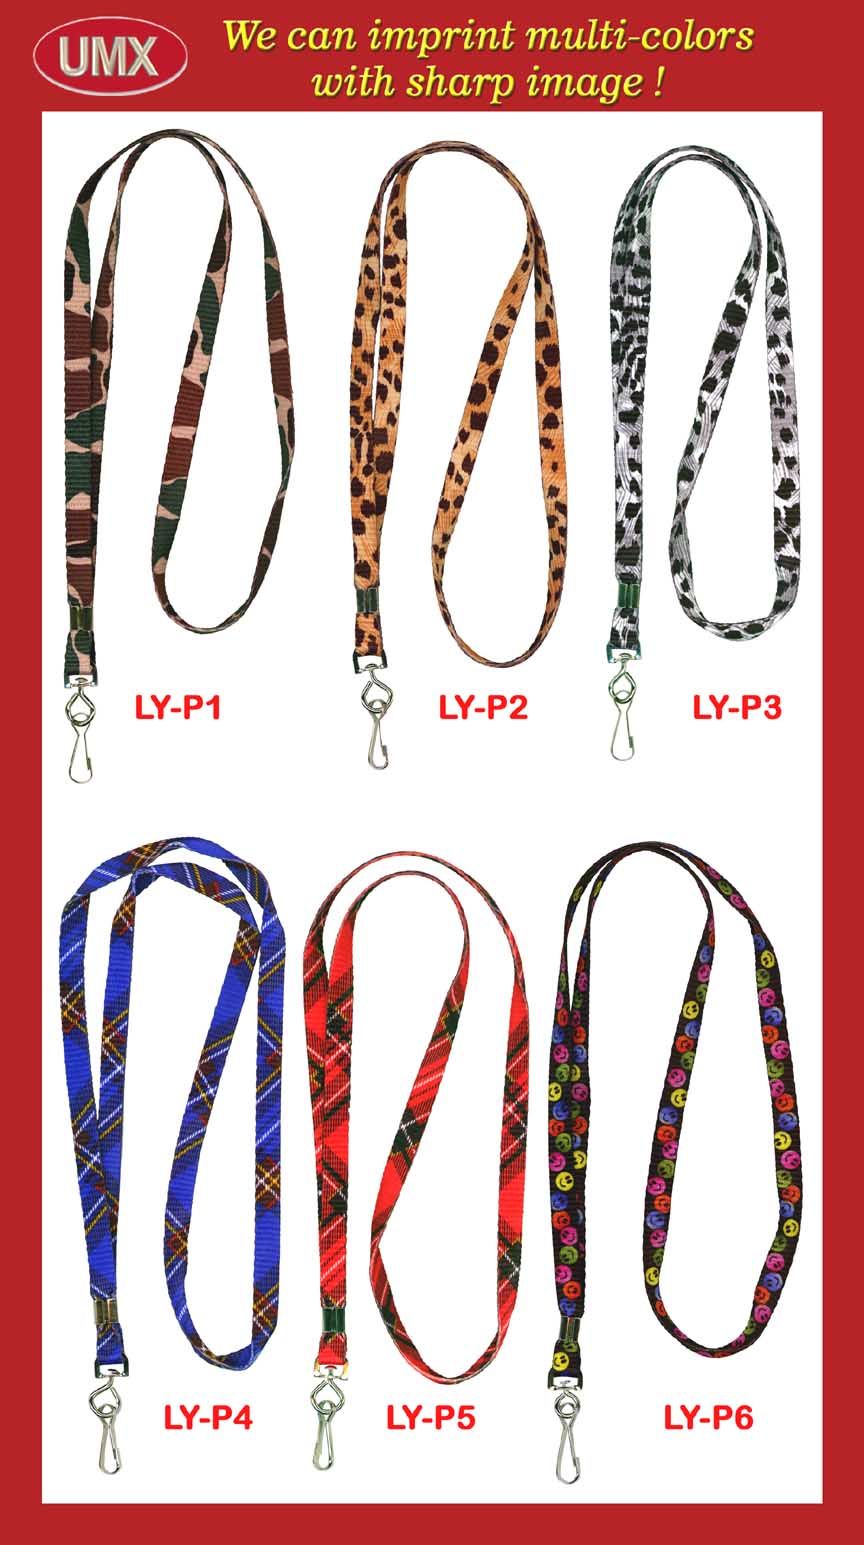 High-Quality and Heavy-Duty Colorful Lanyard